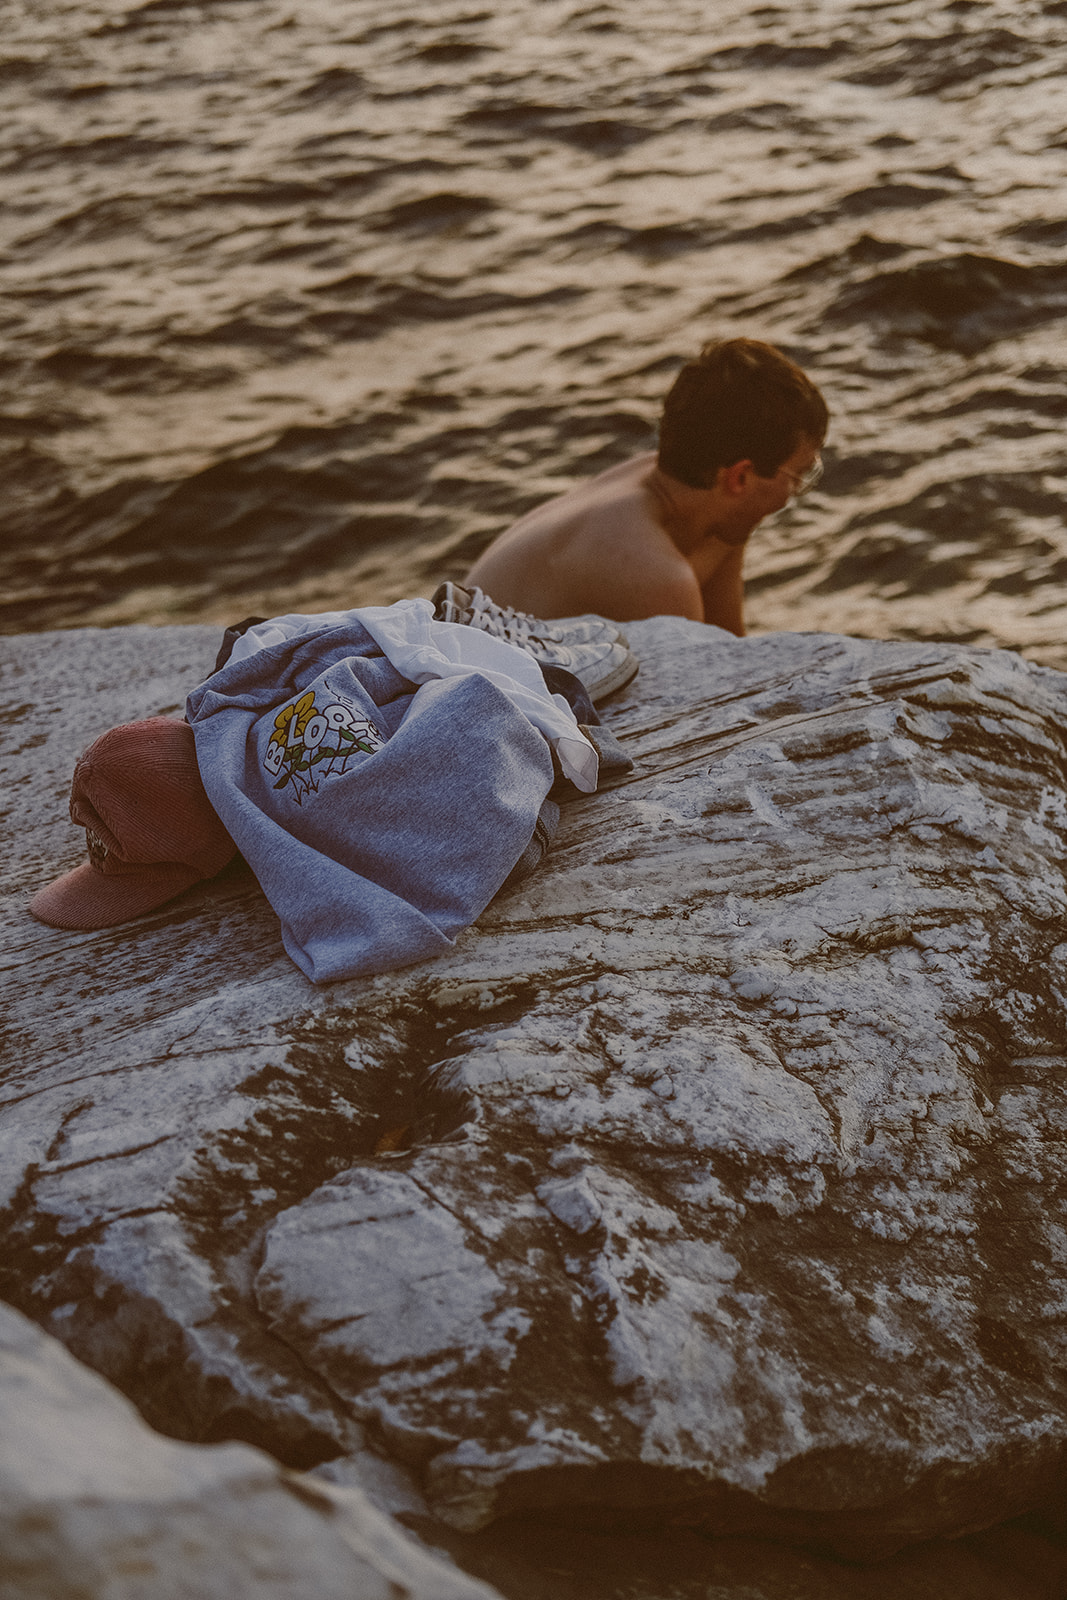 Pile of clothes sitting on a rock in front of the water with a shirtless man visible behind the rock in the water.